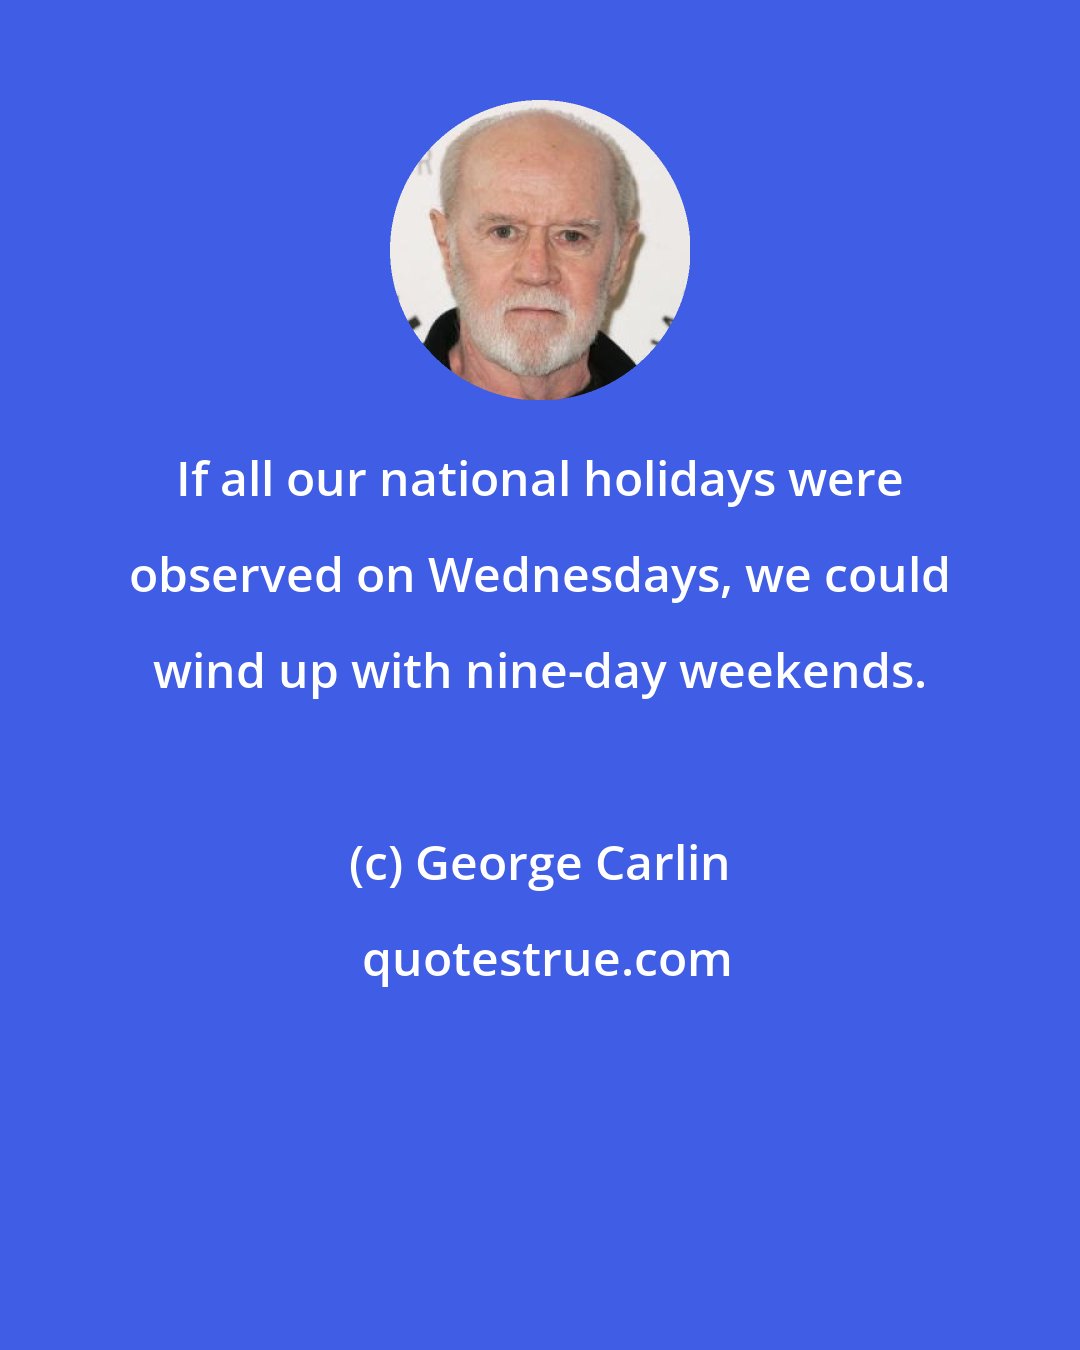 George Carlin: If all our national holidays were observed on Wednesdays, we could wind up with nine-day weekends.